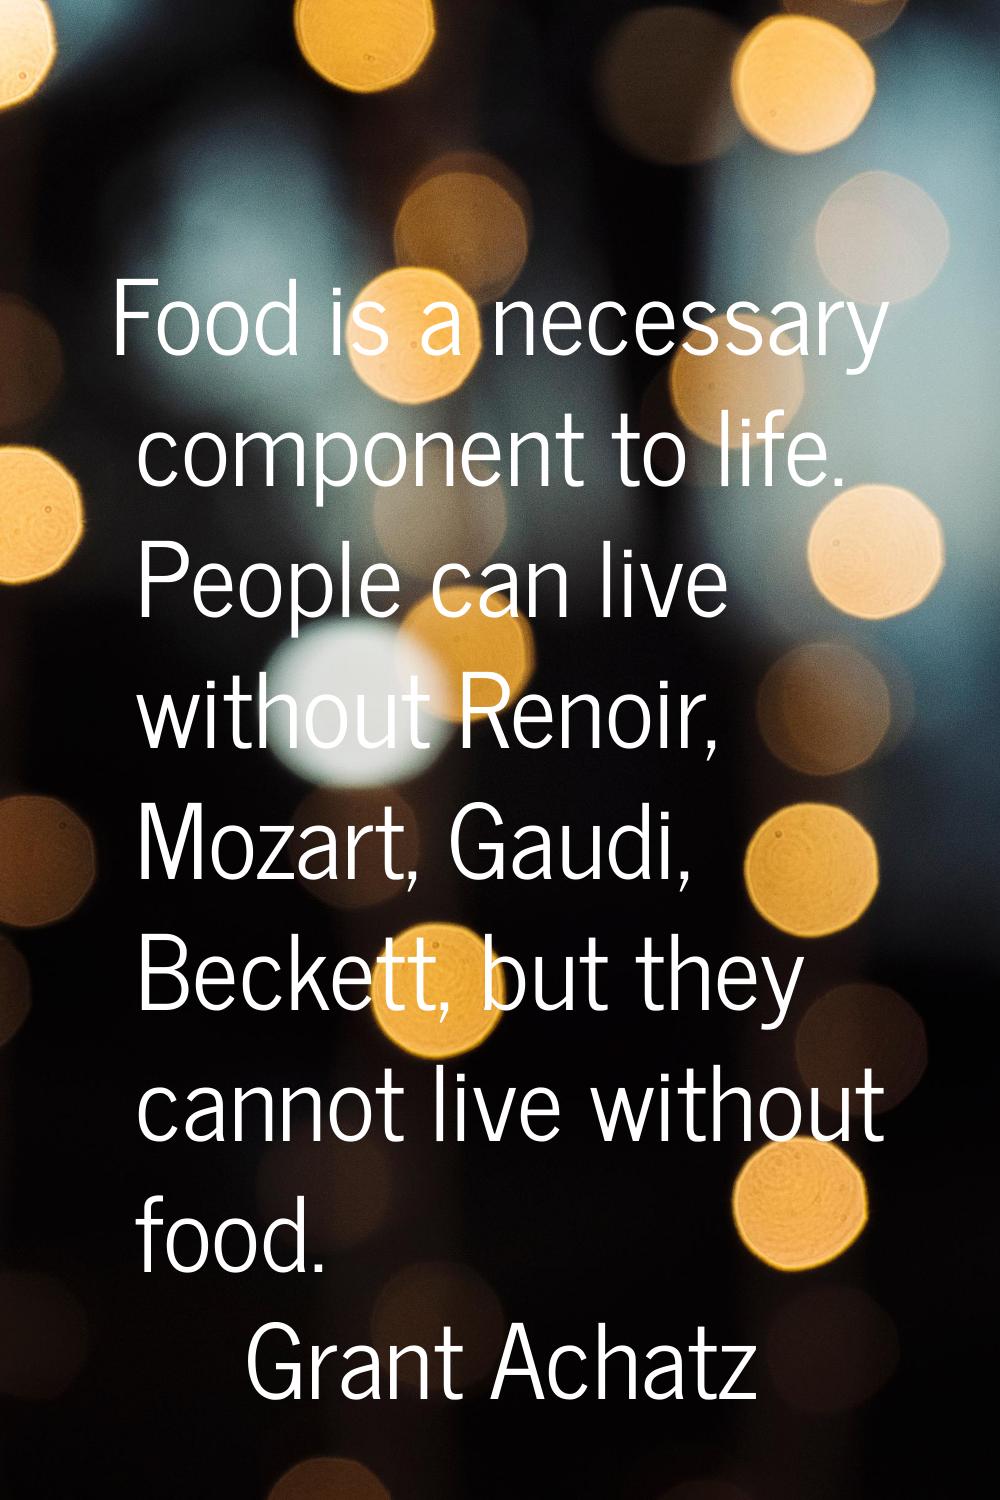 Food is a necessary component to life. People can live without Renoir, Mozart, Gaudi, Beckett, but 